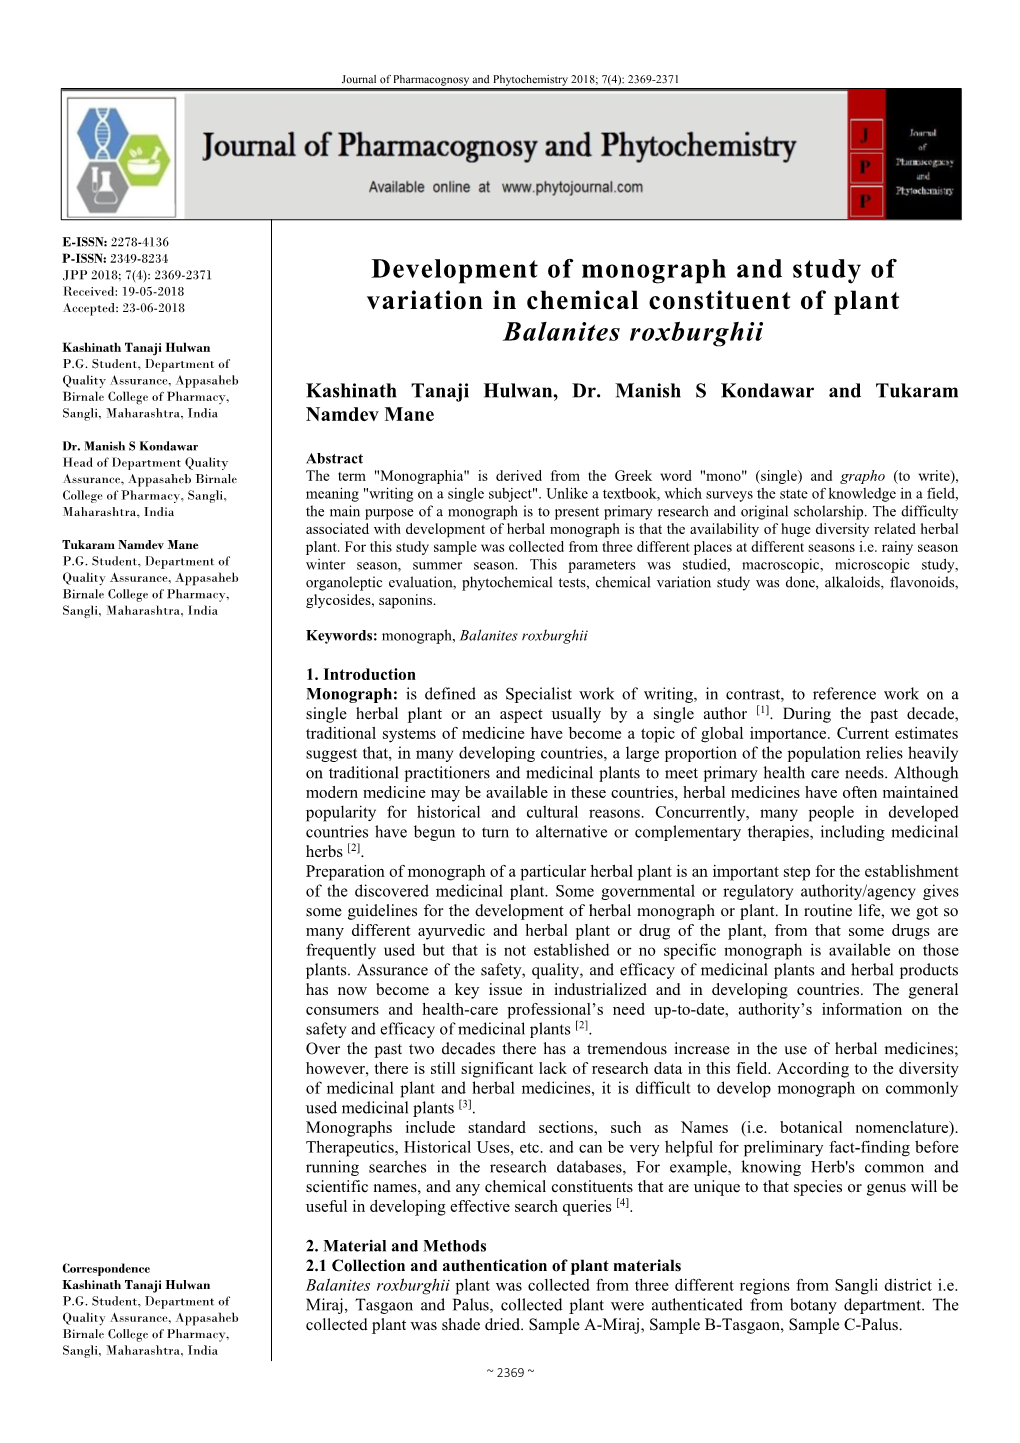 Development of Monograph and Study of Variation in Chemical Constituent